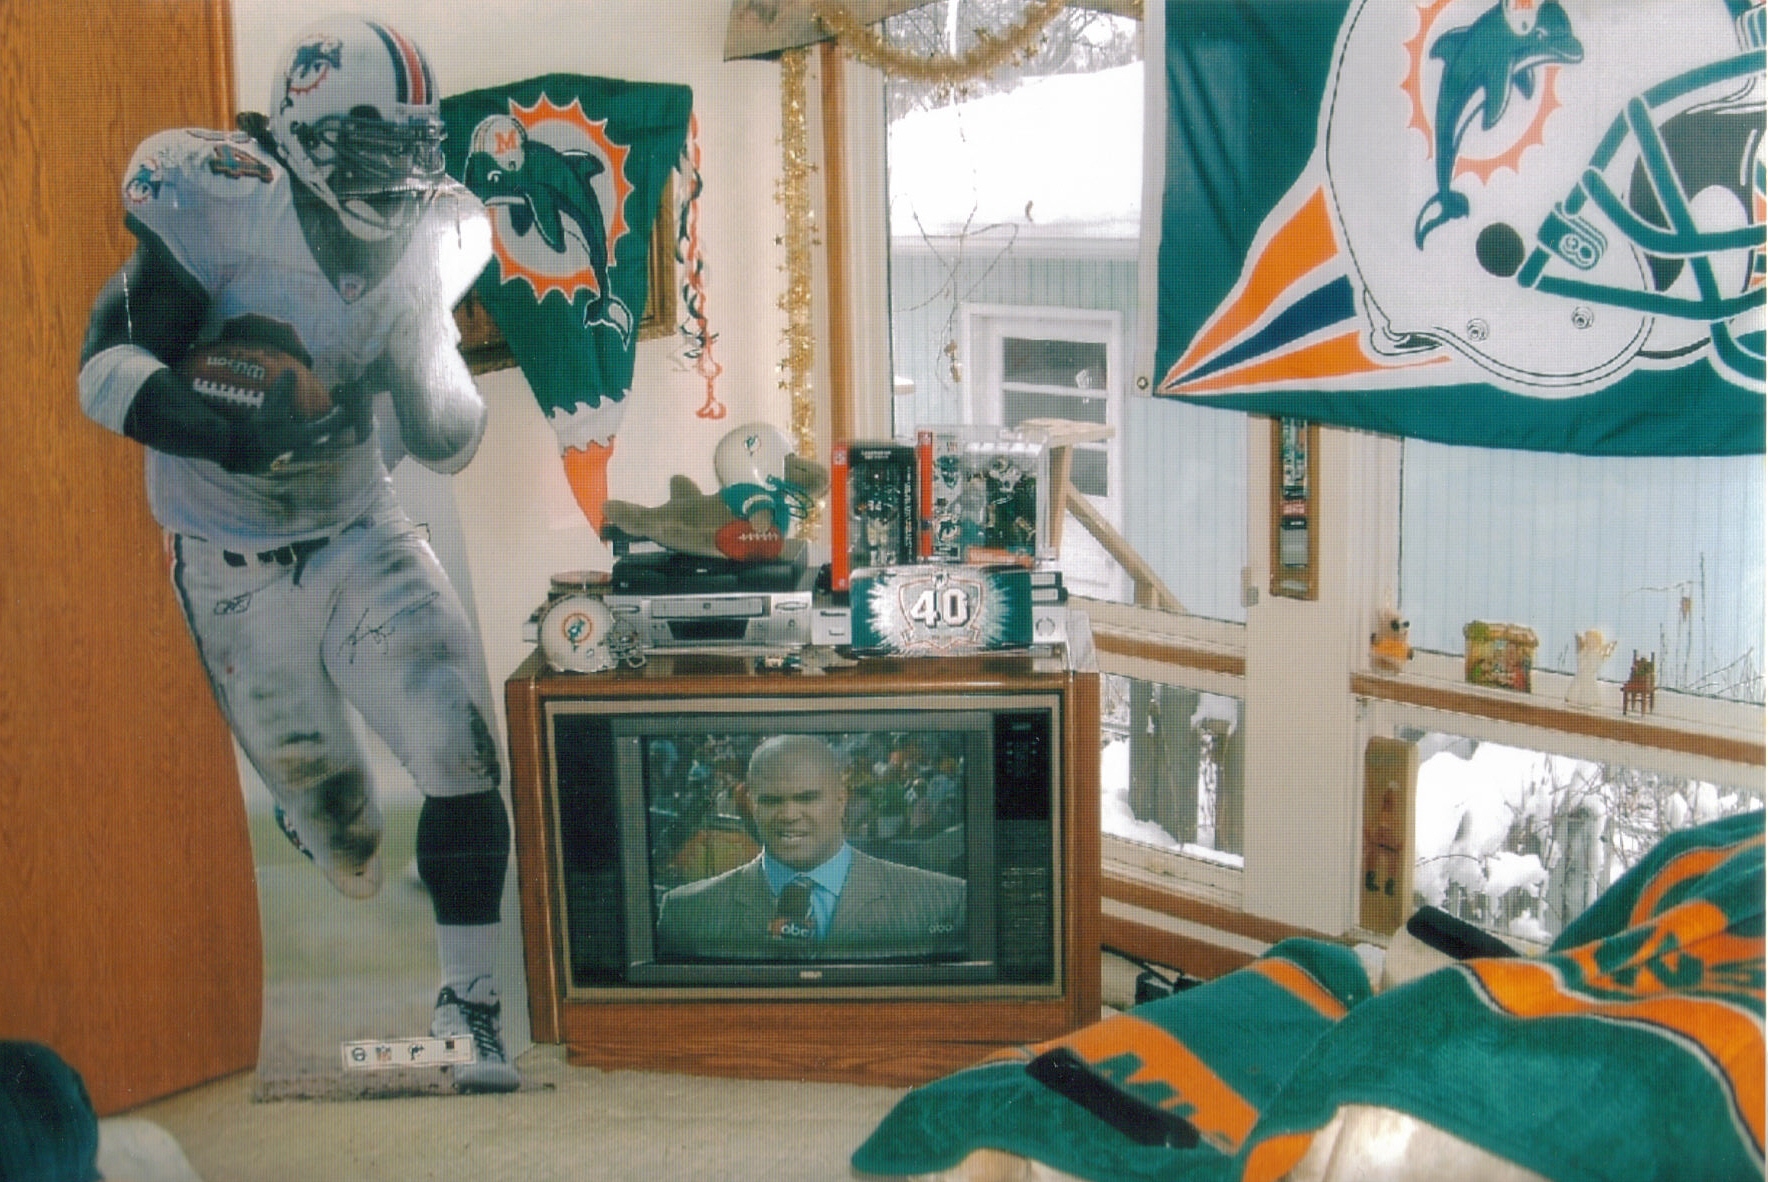 December of 2005: living room set to watch Dolphins